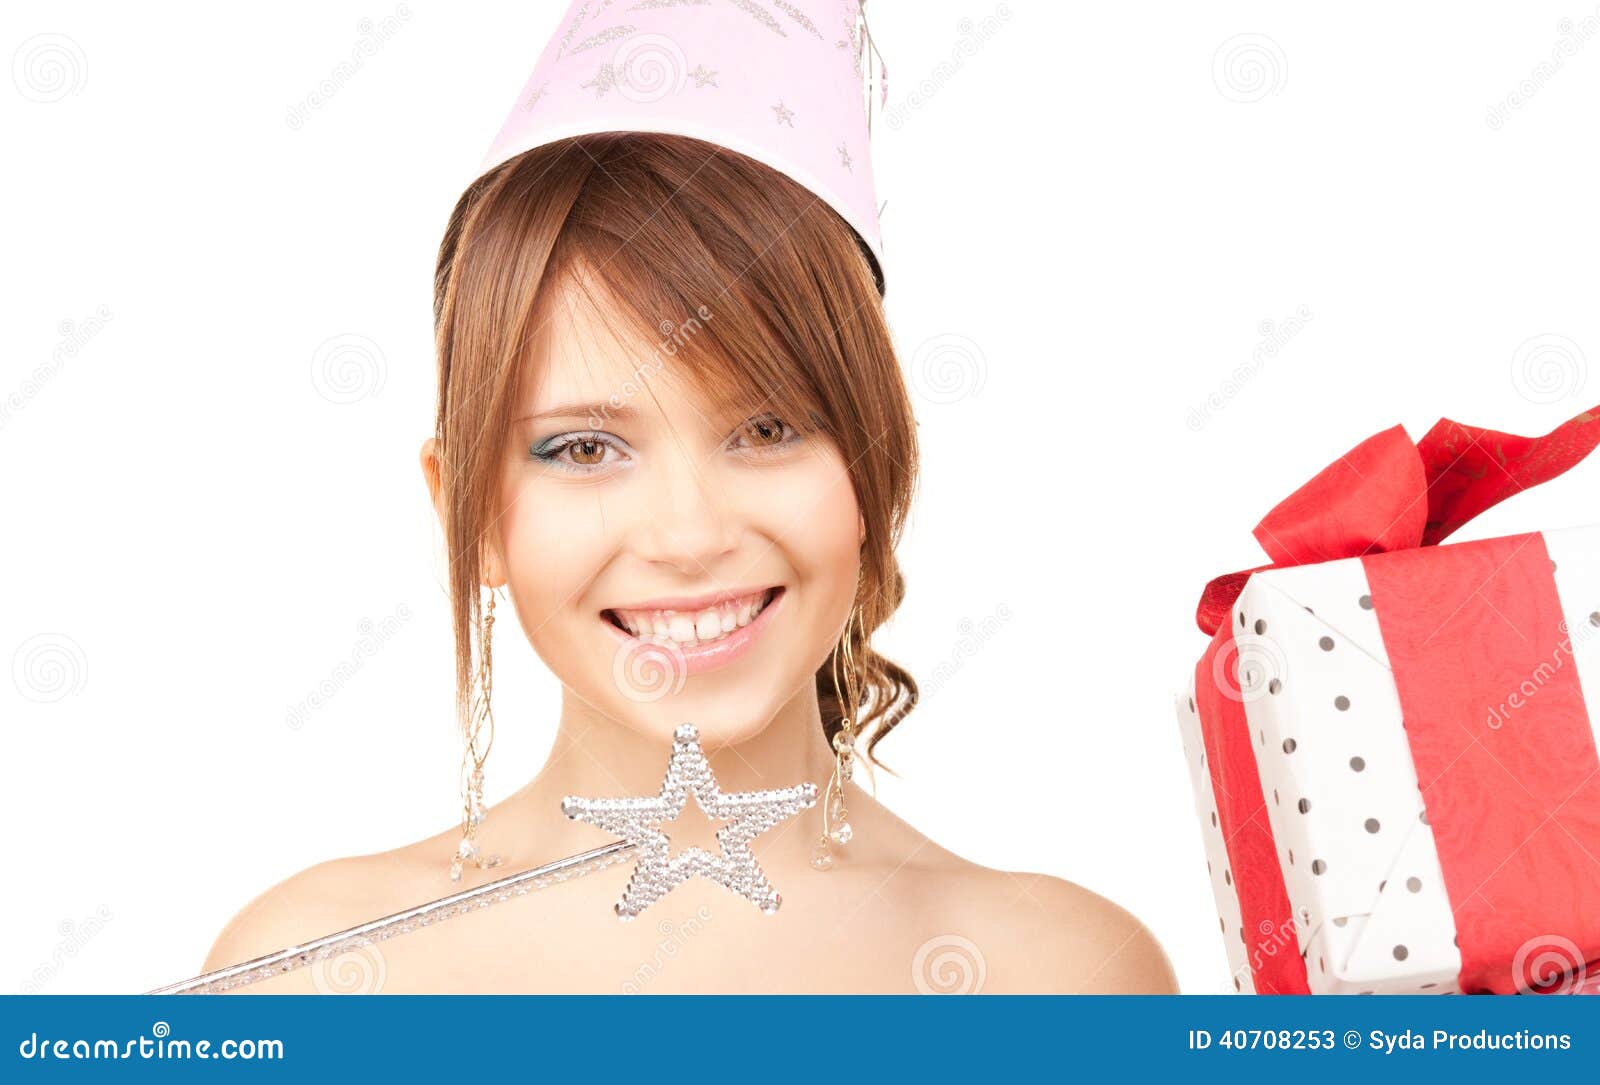 Teenage Party Girl With Magic Wand And Gift Box Stock Image Image Of